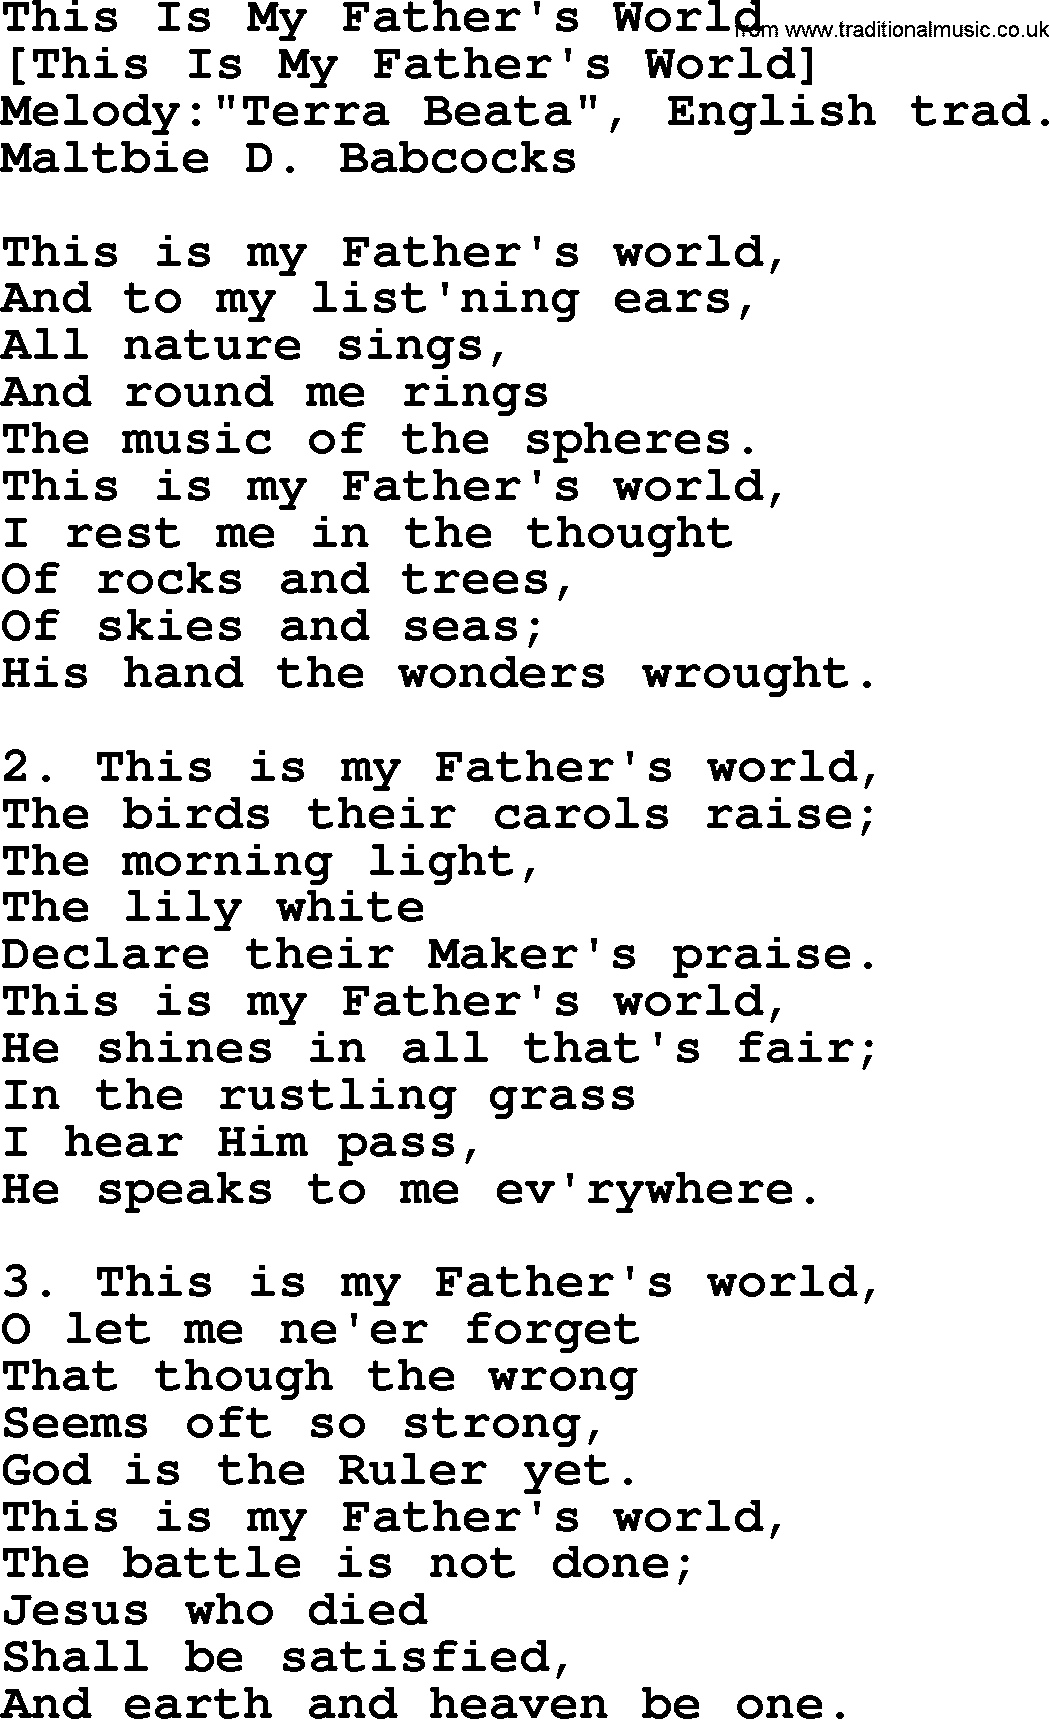 Old English Song: This Is My Father's World lyrics